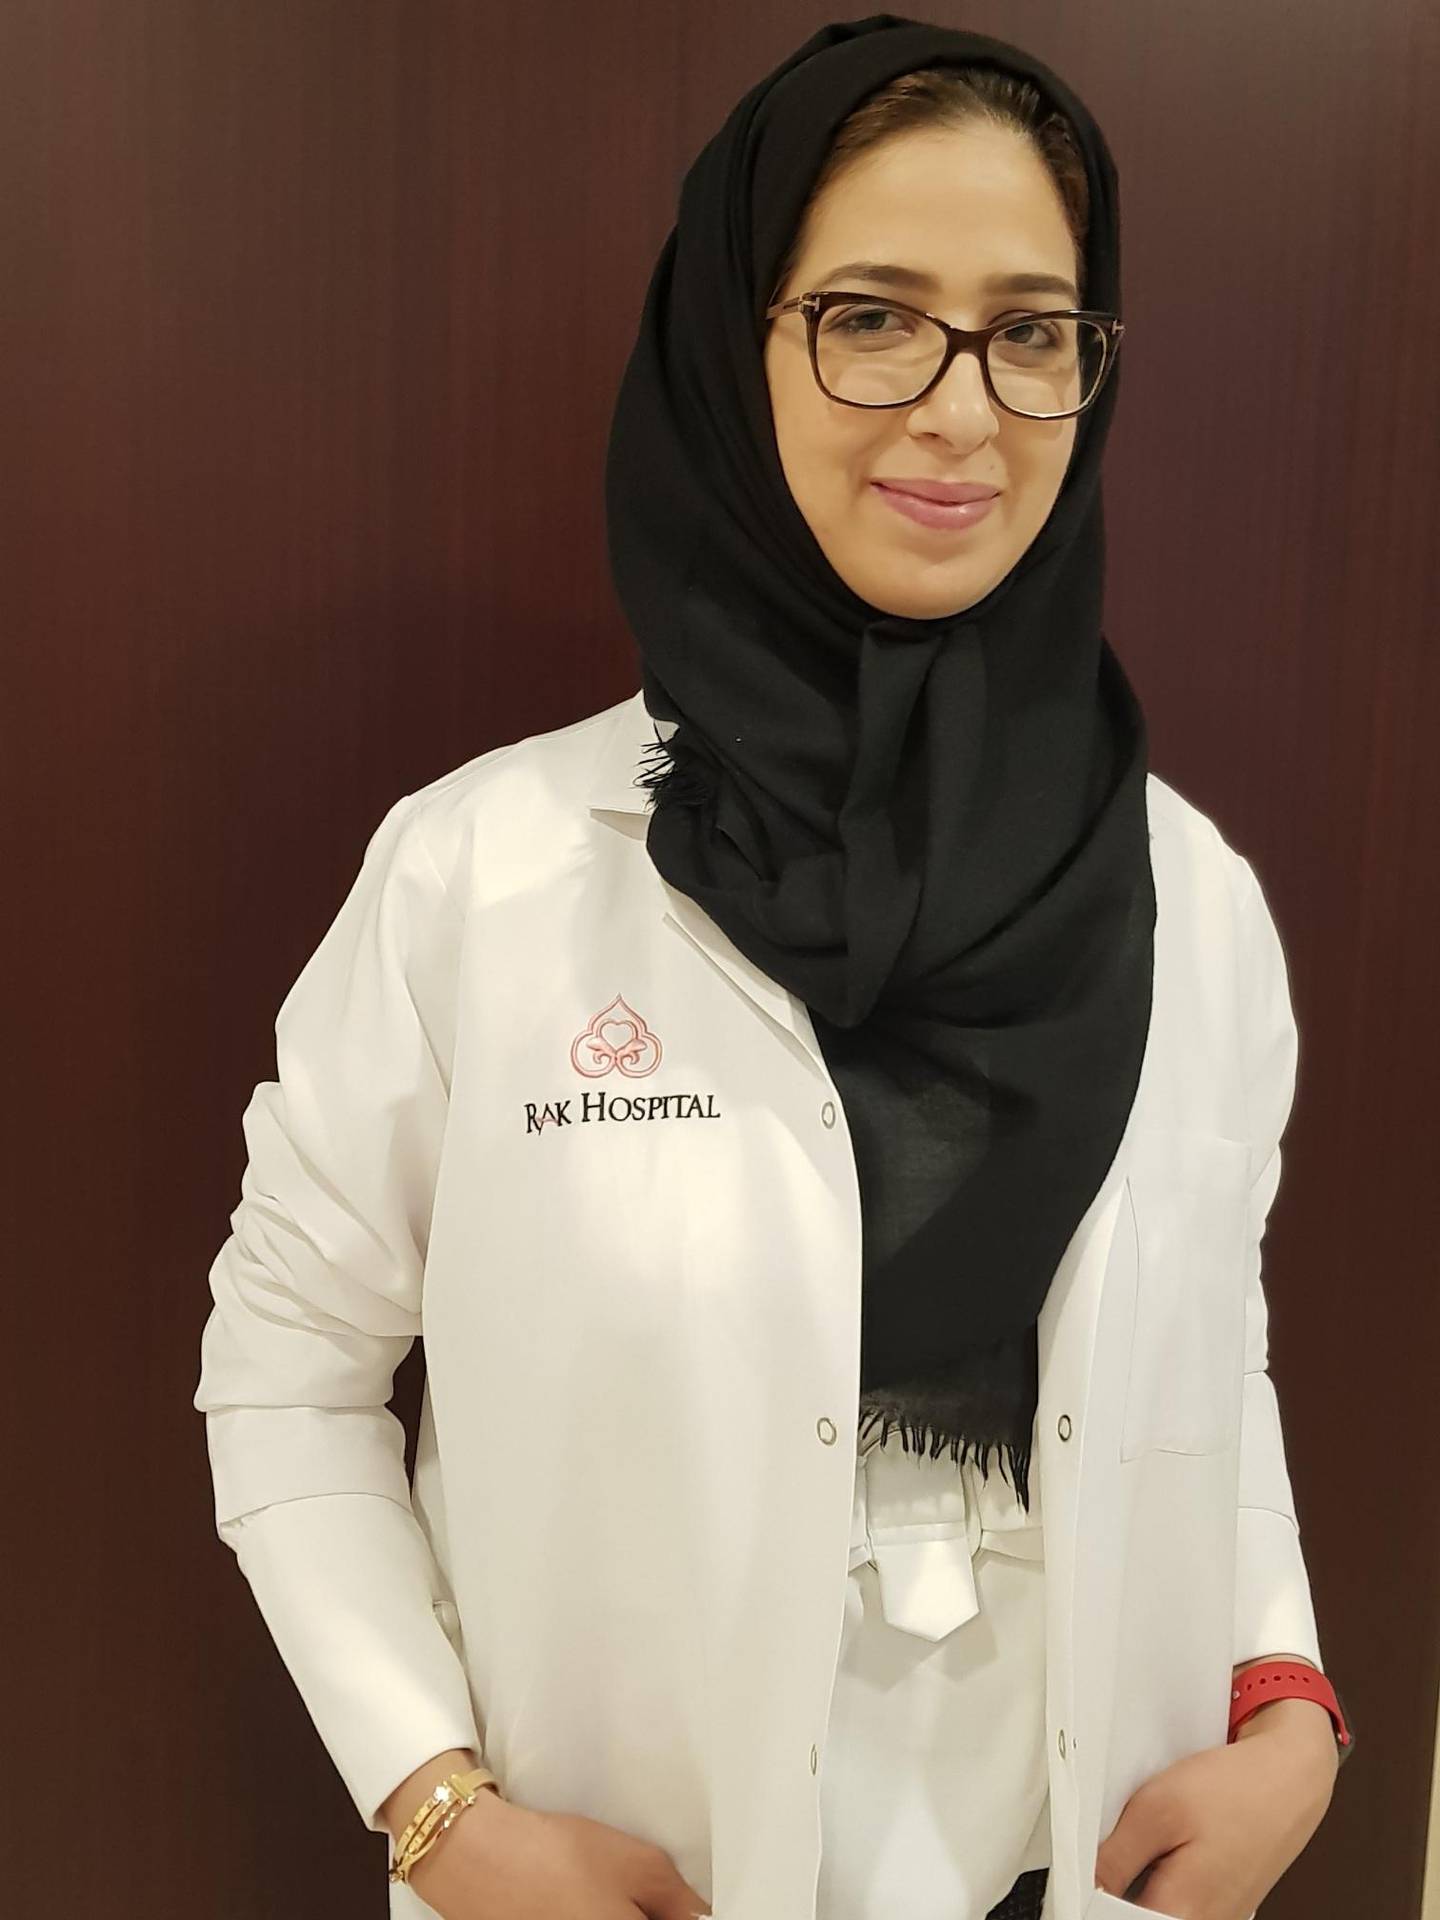 Ruba El Hourani, head dietician at RAK Hospital, says the keto diet may affect the composition and function of the gut microbiome, which can burden the organs